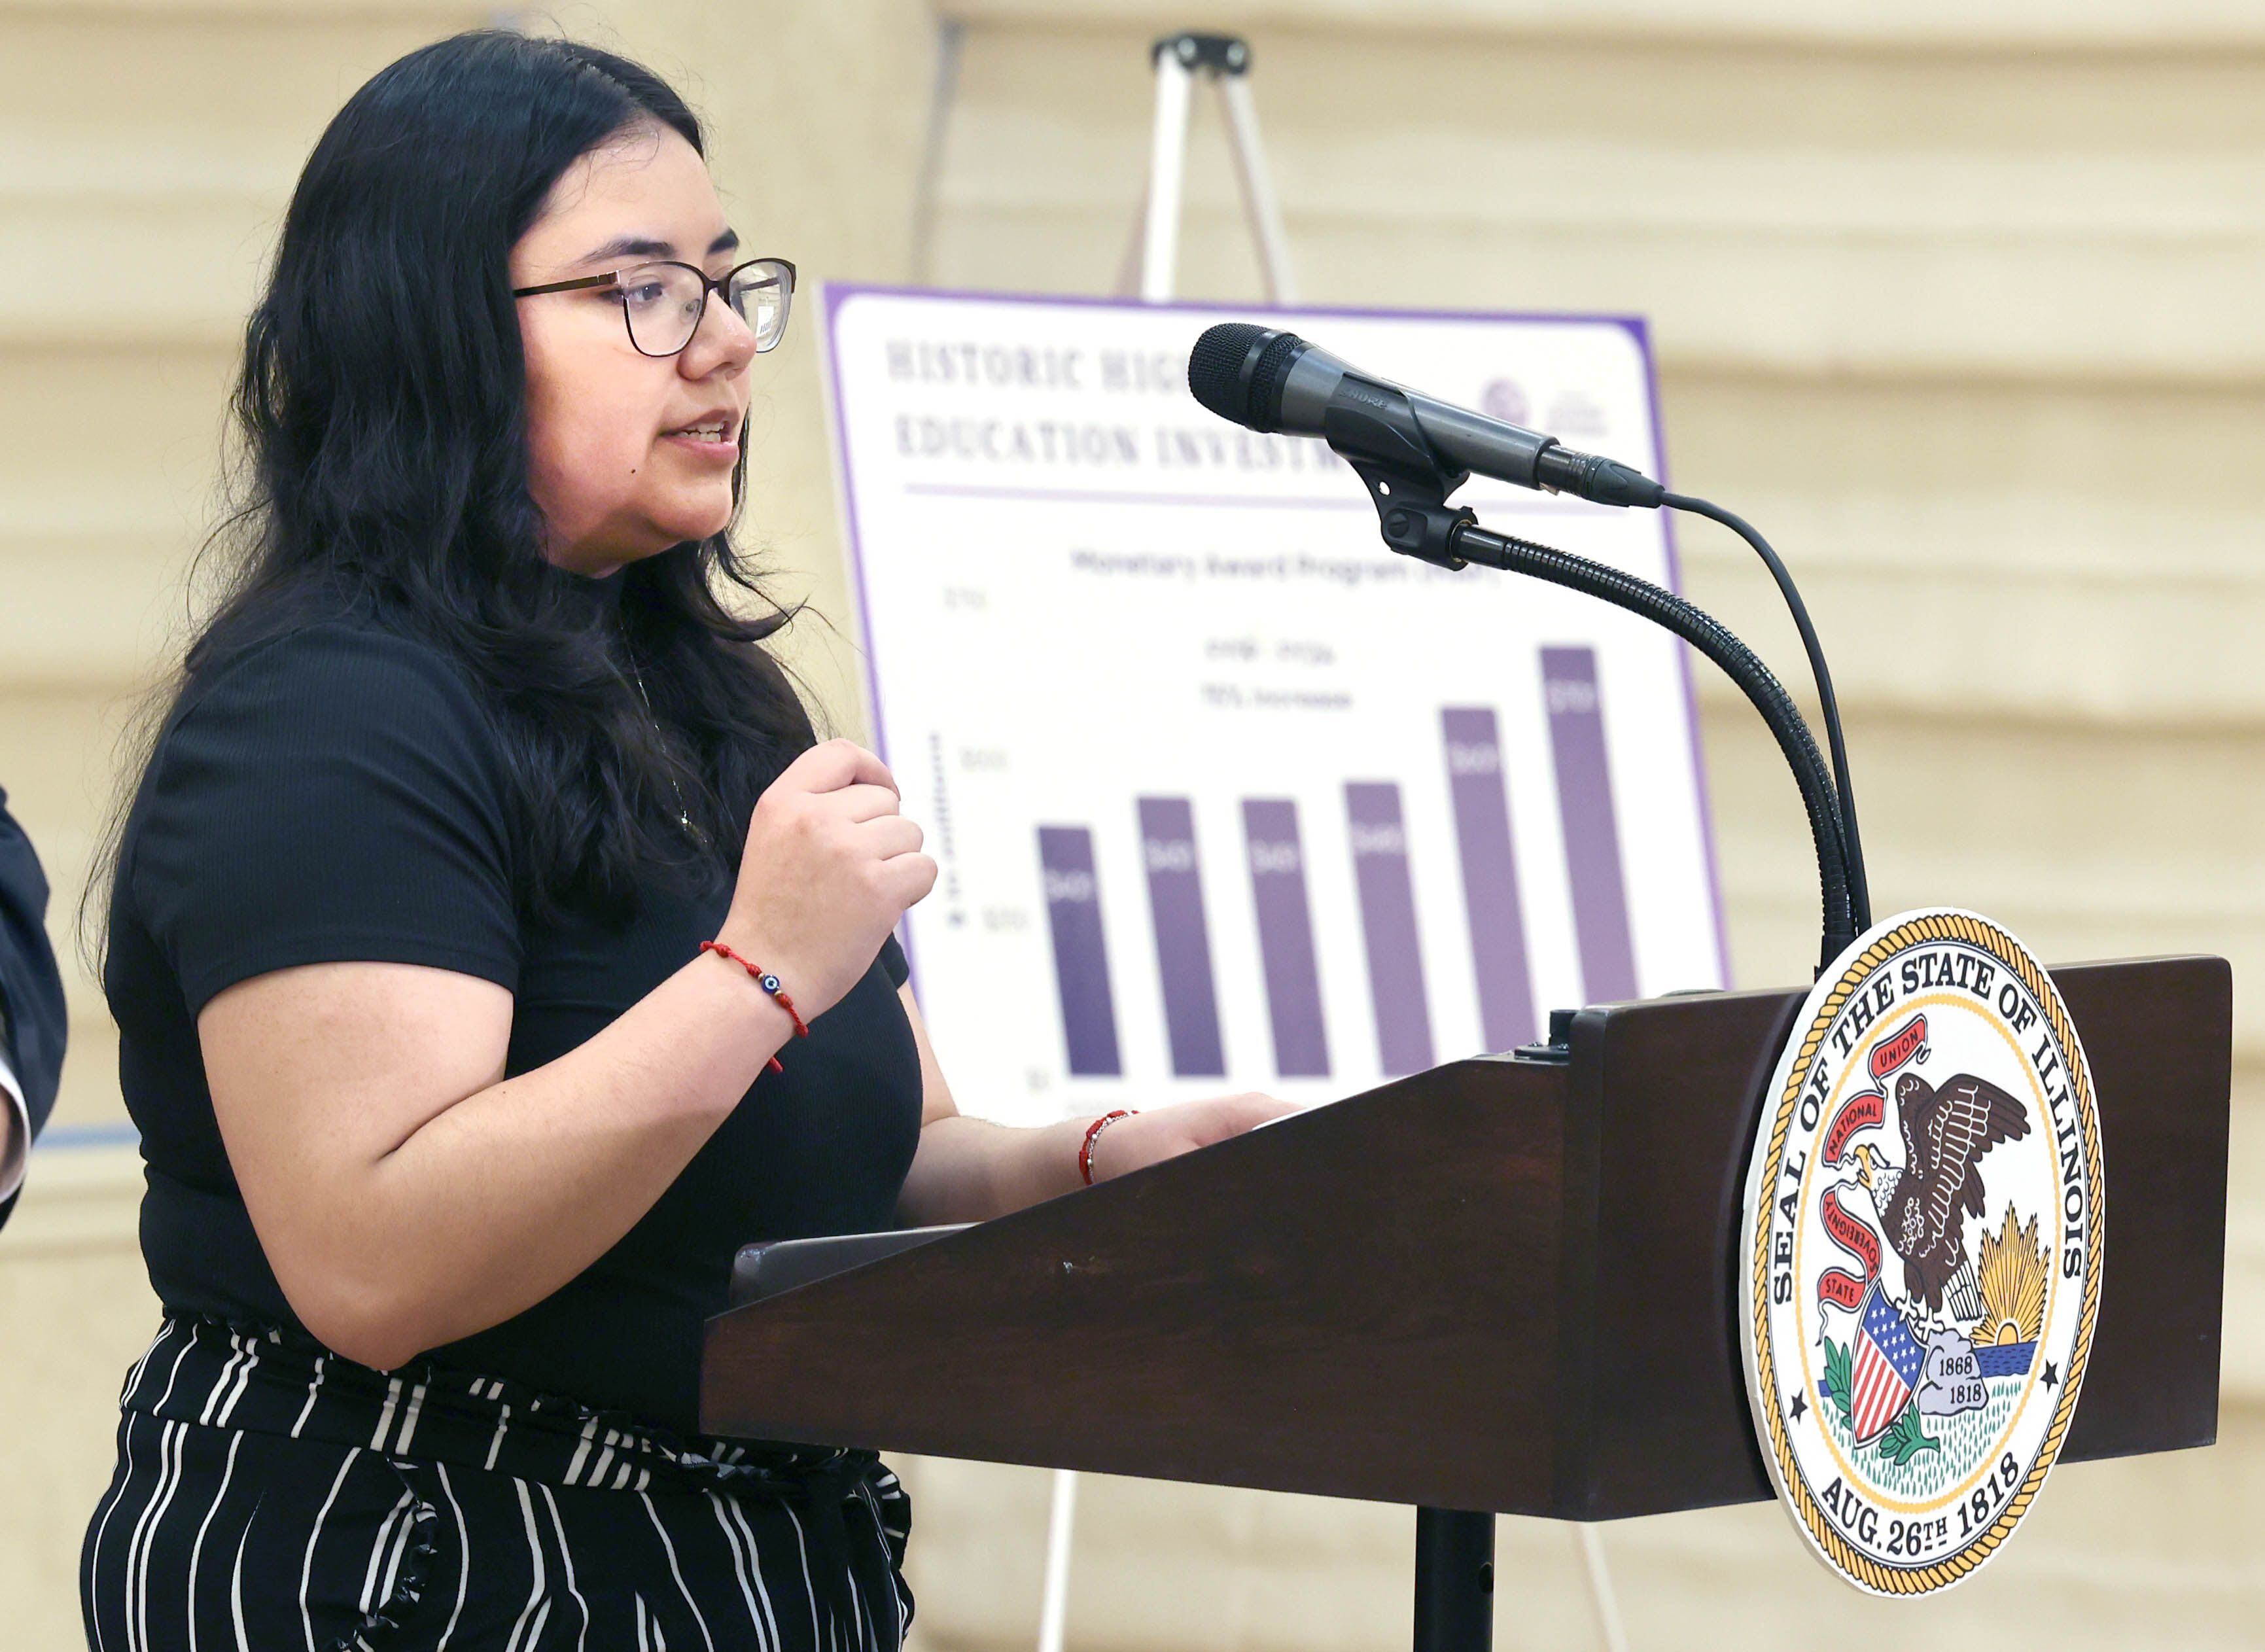 Northern Illinois University sophomore Brittany Hernandez, from Aurora, speaks during a news conference Tuesday, April, 4, 2023, in the Barsema Alumni and Visitors Center at Northern Illinois University in DeKalb. Gov. JB Pritzker along with a group of llinois lawmakers, DeKalb city officials and representatives from NIU were on hand to promote the importance of funding higher education in Illinois.